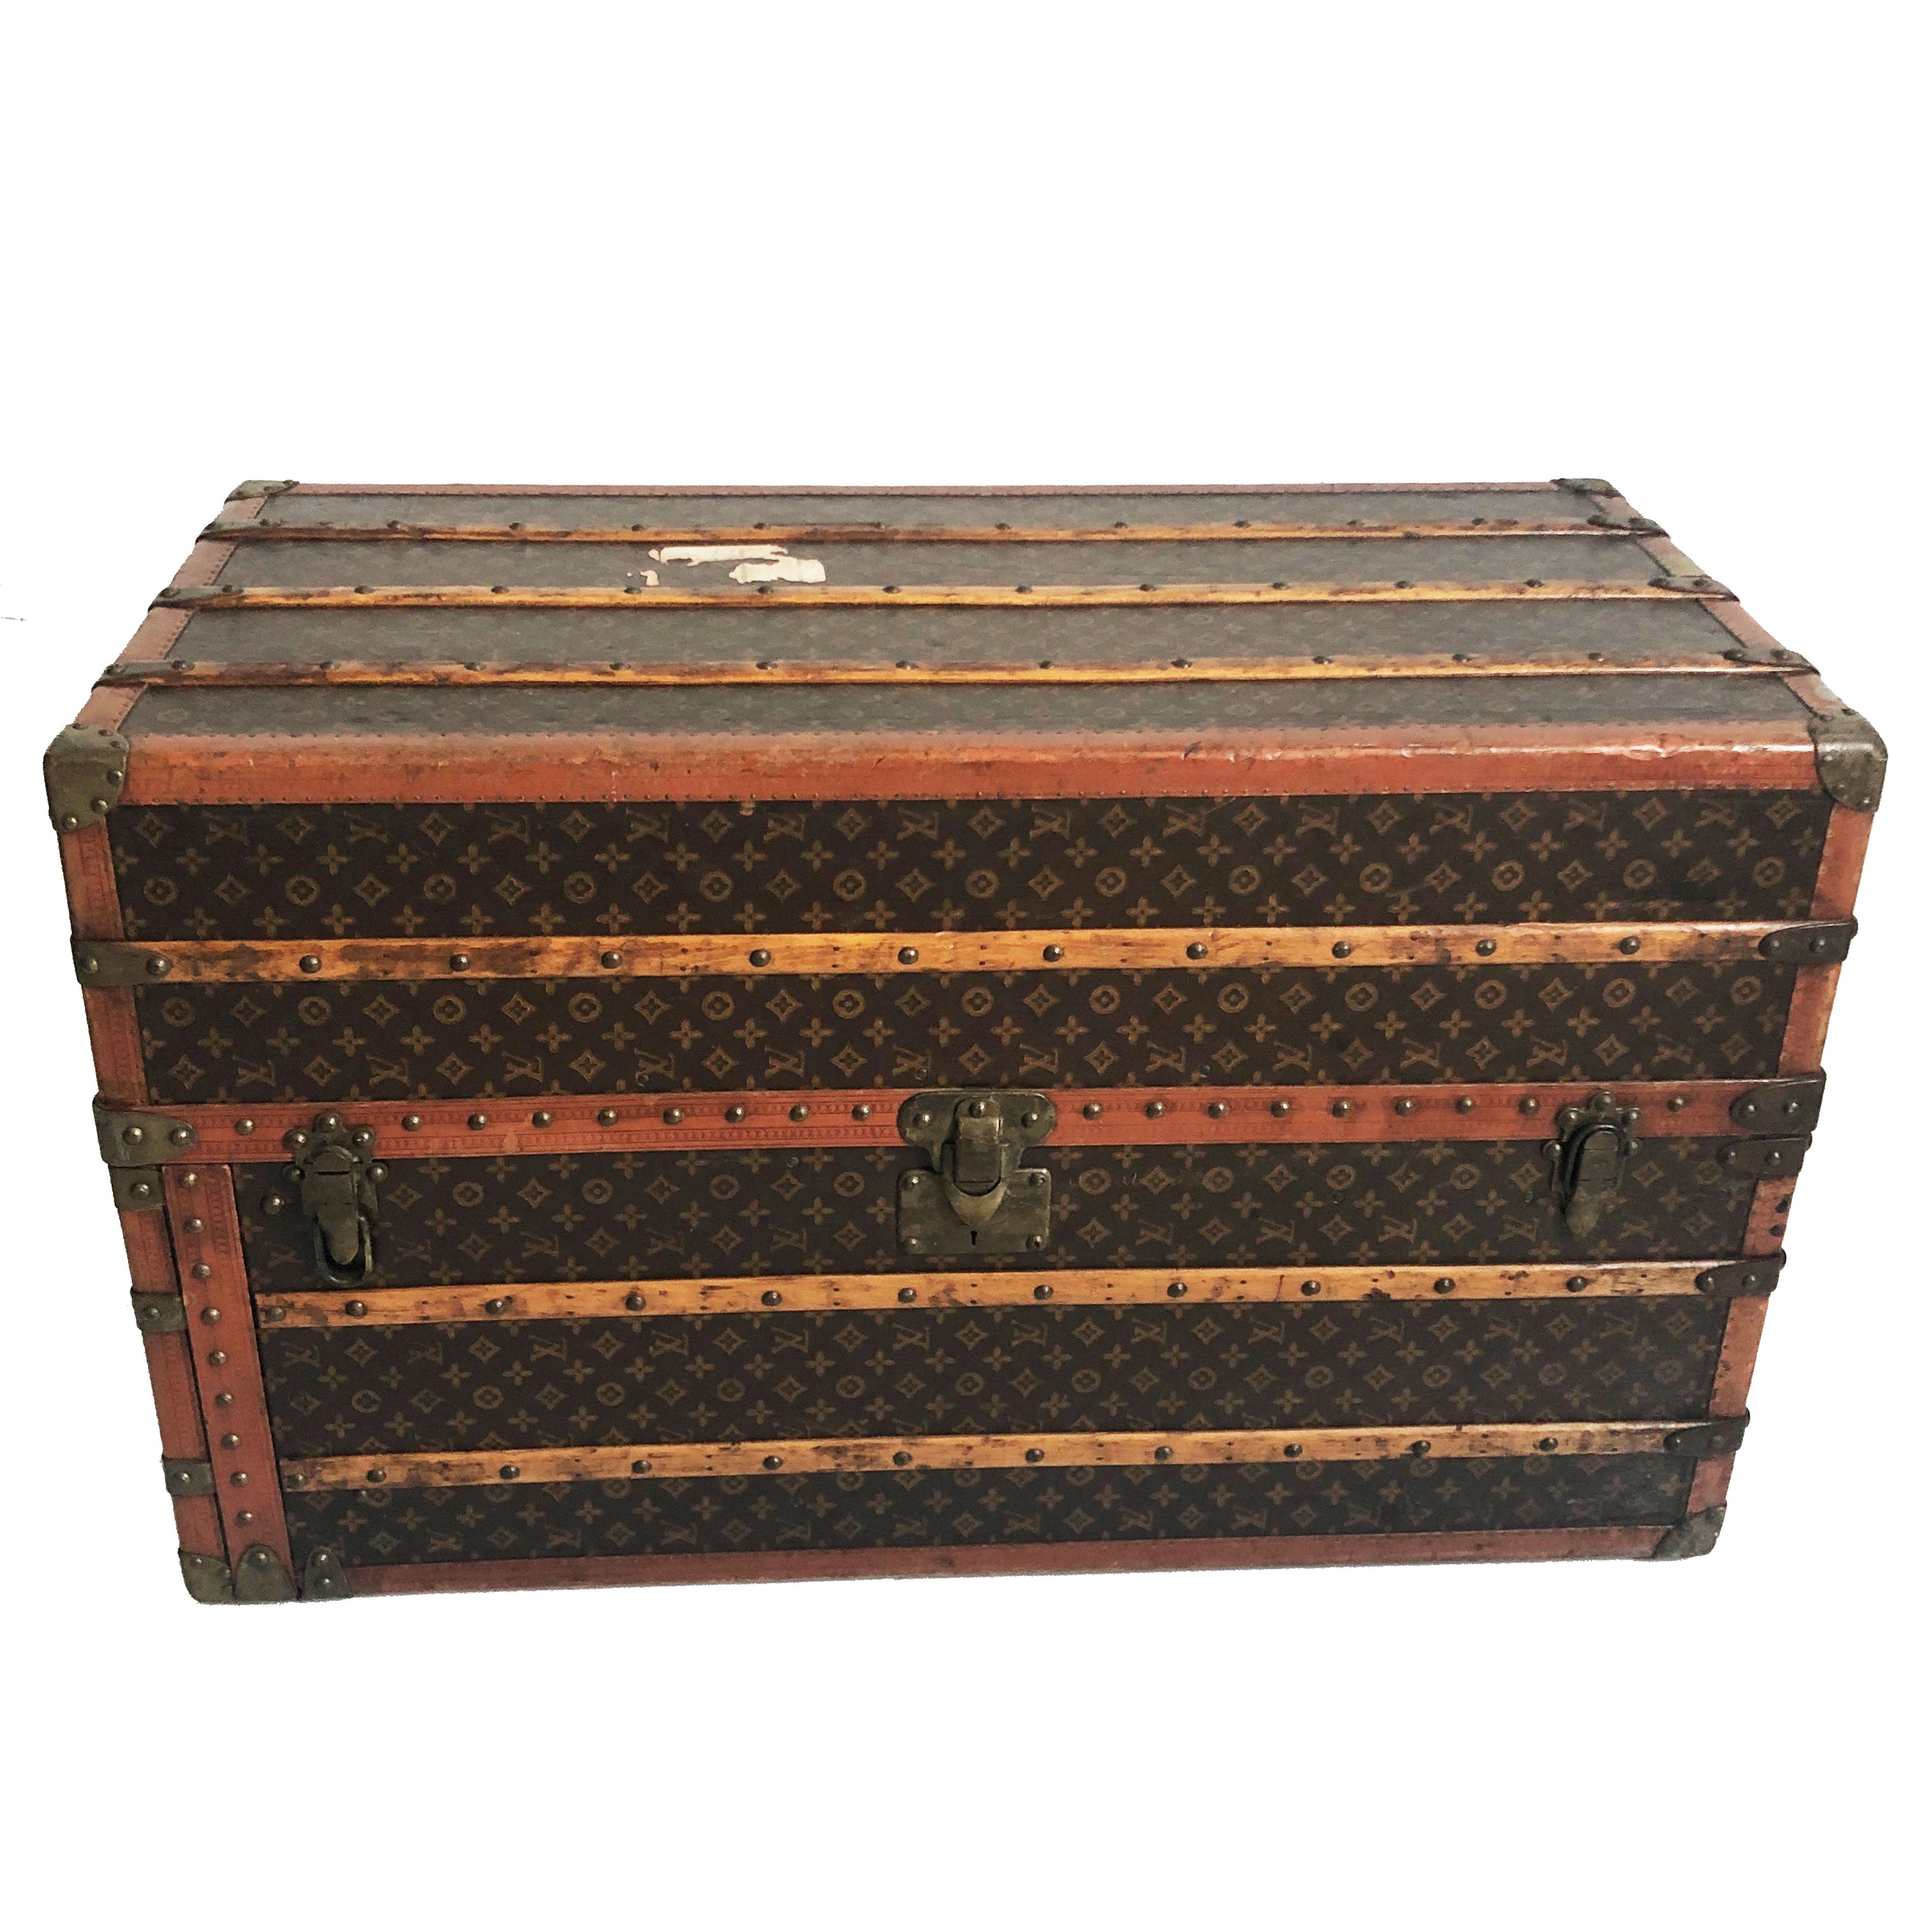 Louis Vuitton Large Wardrobe Steamer Trunk Monogram Travel Case Early 20th C  For Sale 4